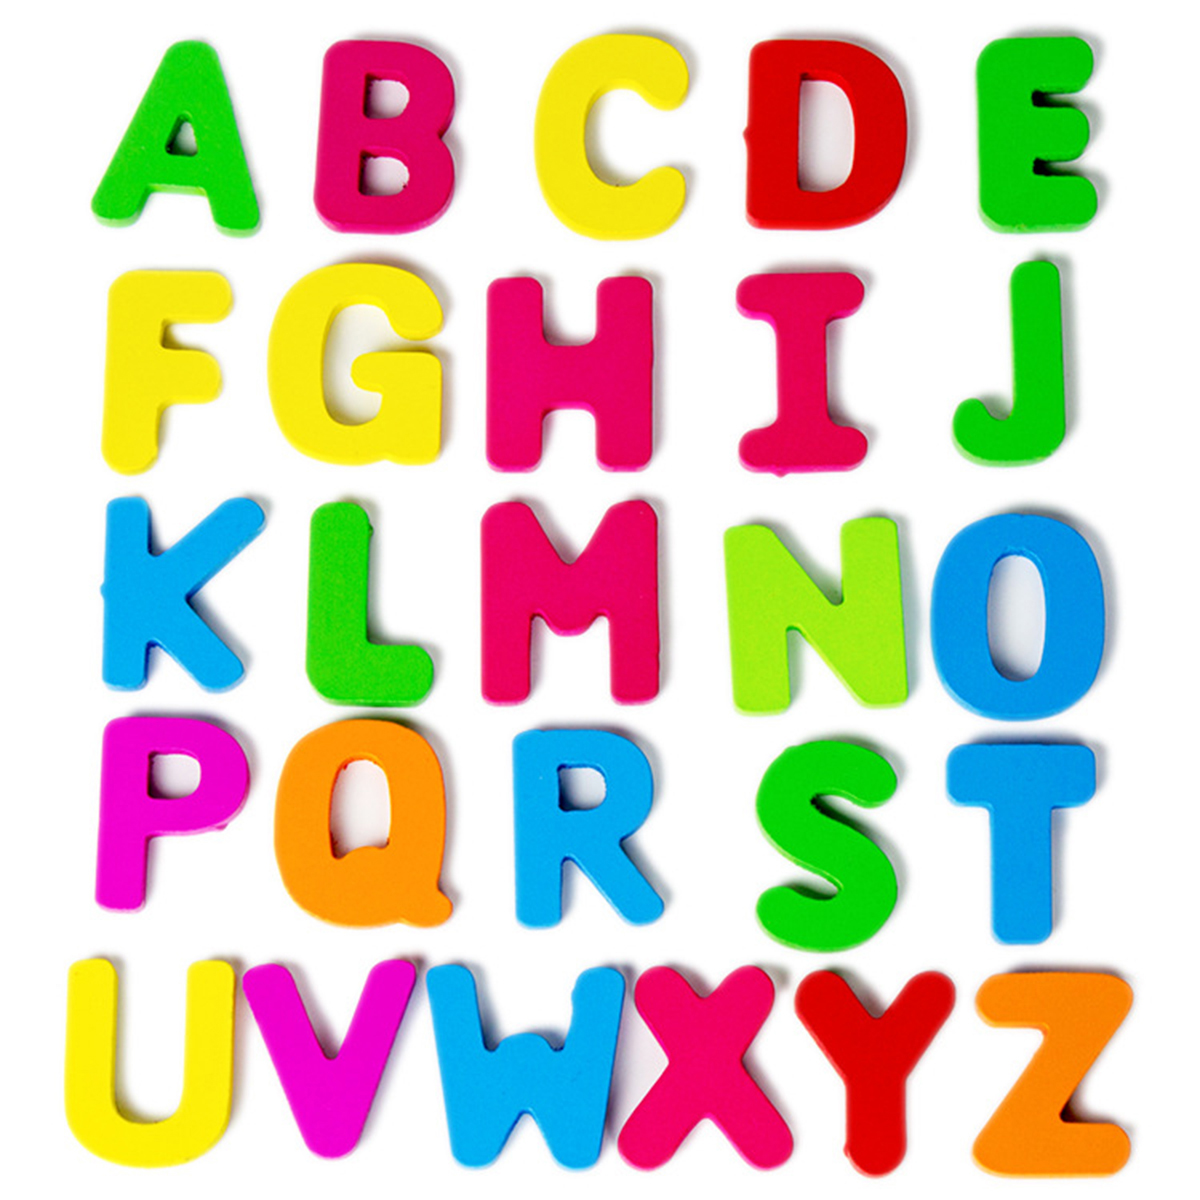 Puzzle-Alphabet-Spelling-English-Letters-Animal-Cards-Educational-Learning-Toy-for-Kids-Gift-1726968-11